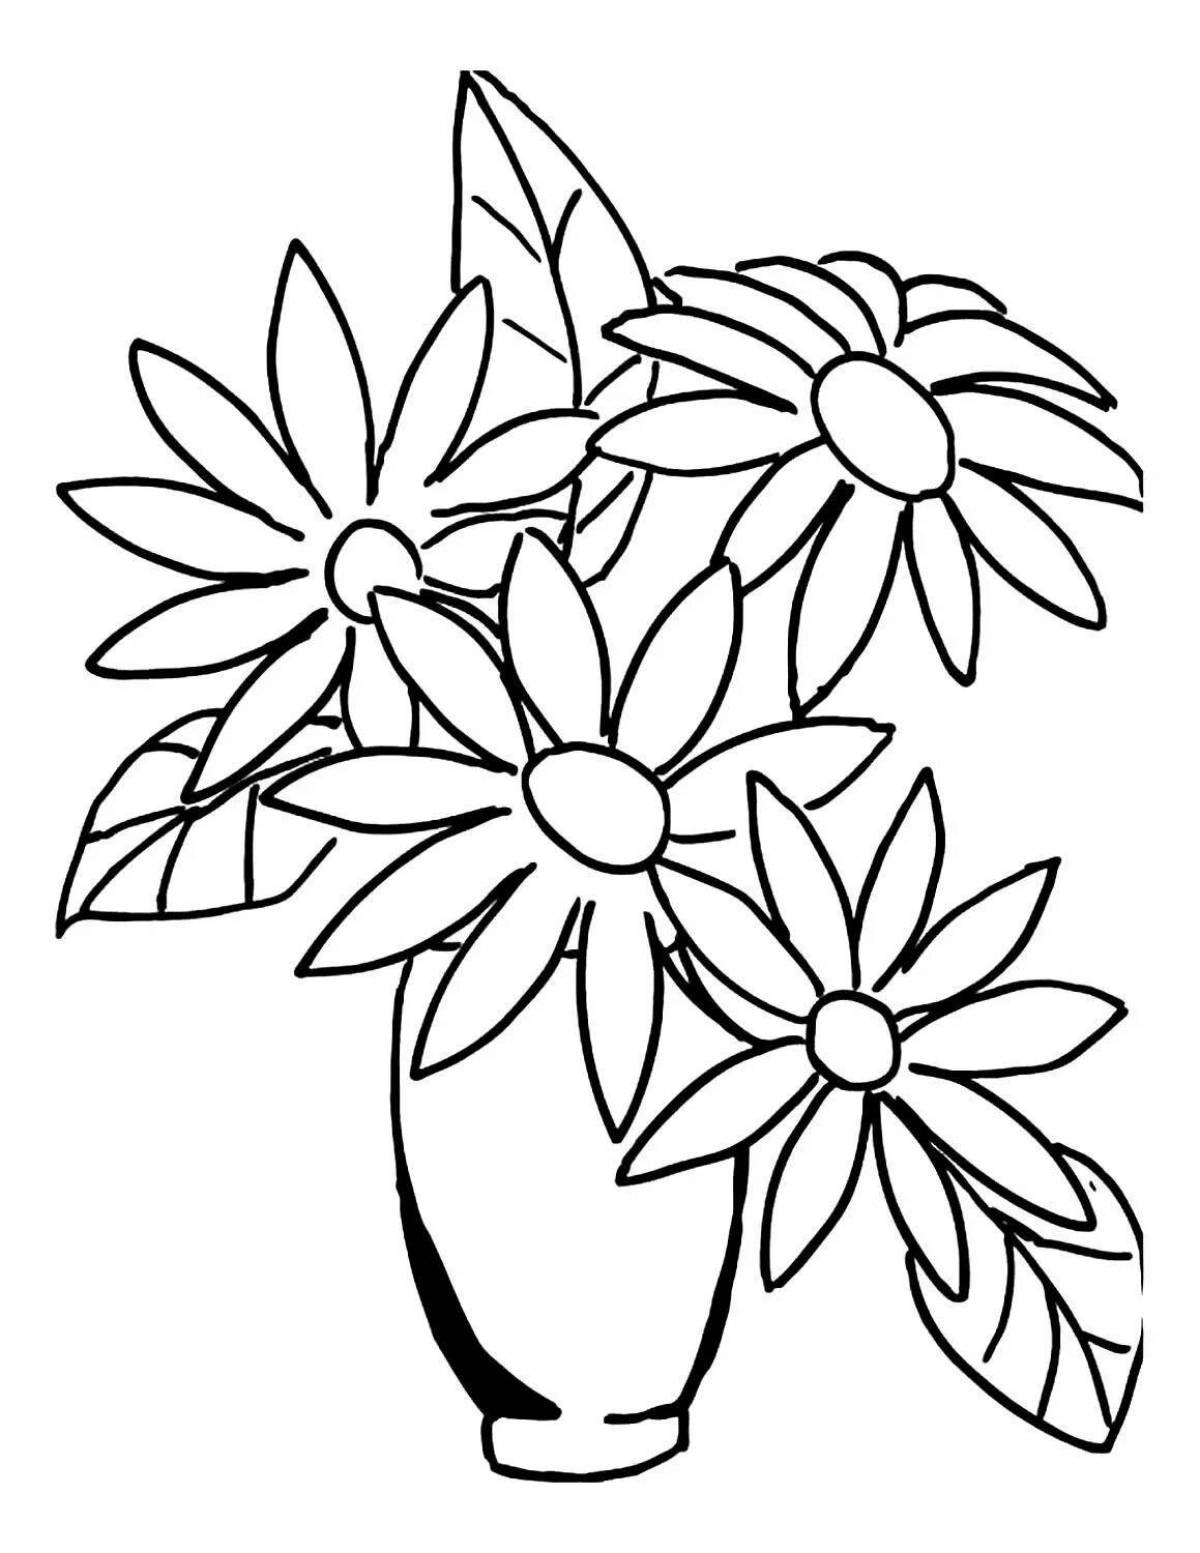 Exciting vase of flowers coloring book for children